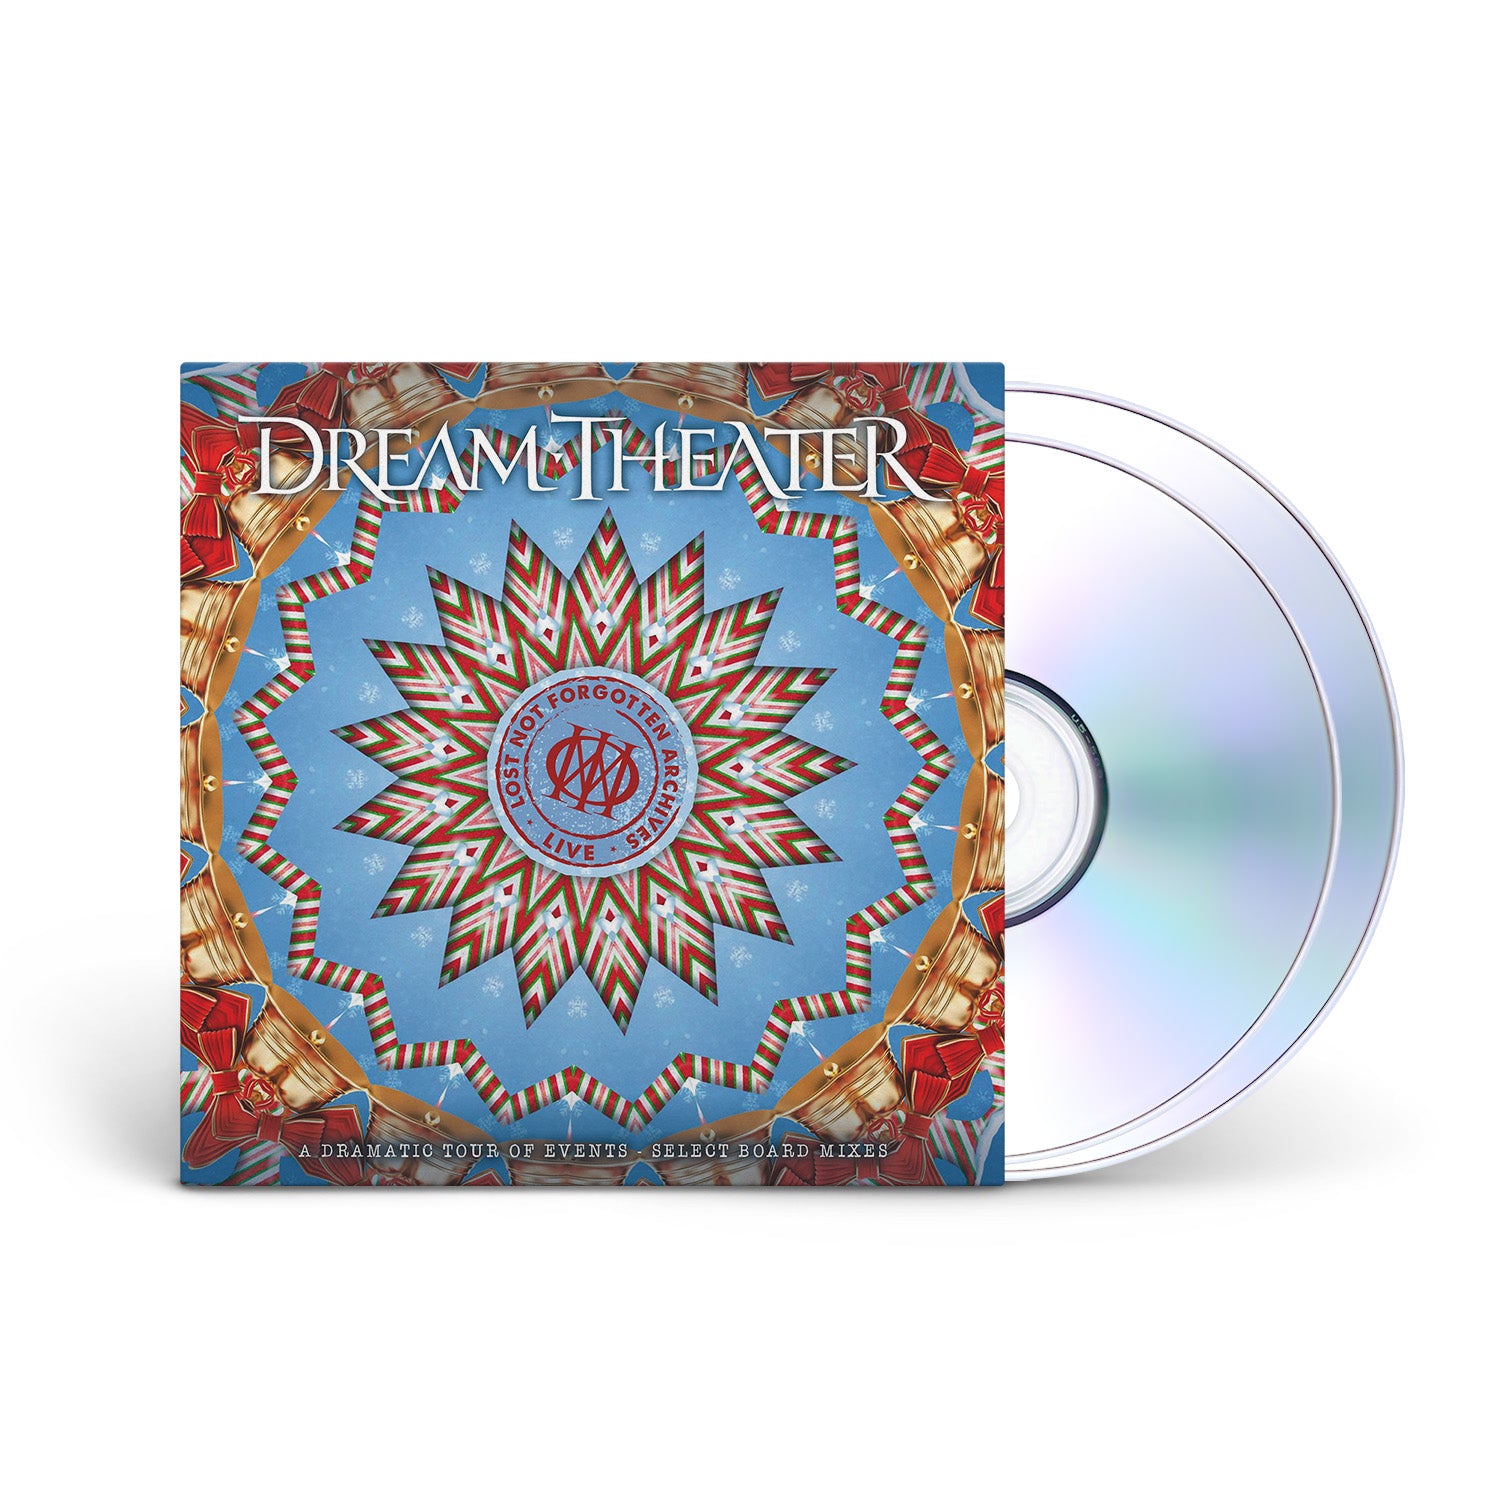 DREAM THEATER - Lost Not Forgotten Archives: A Dramatic Tour of Events - Select Board Mixes - 2CD